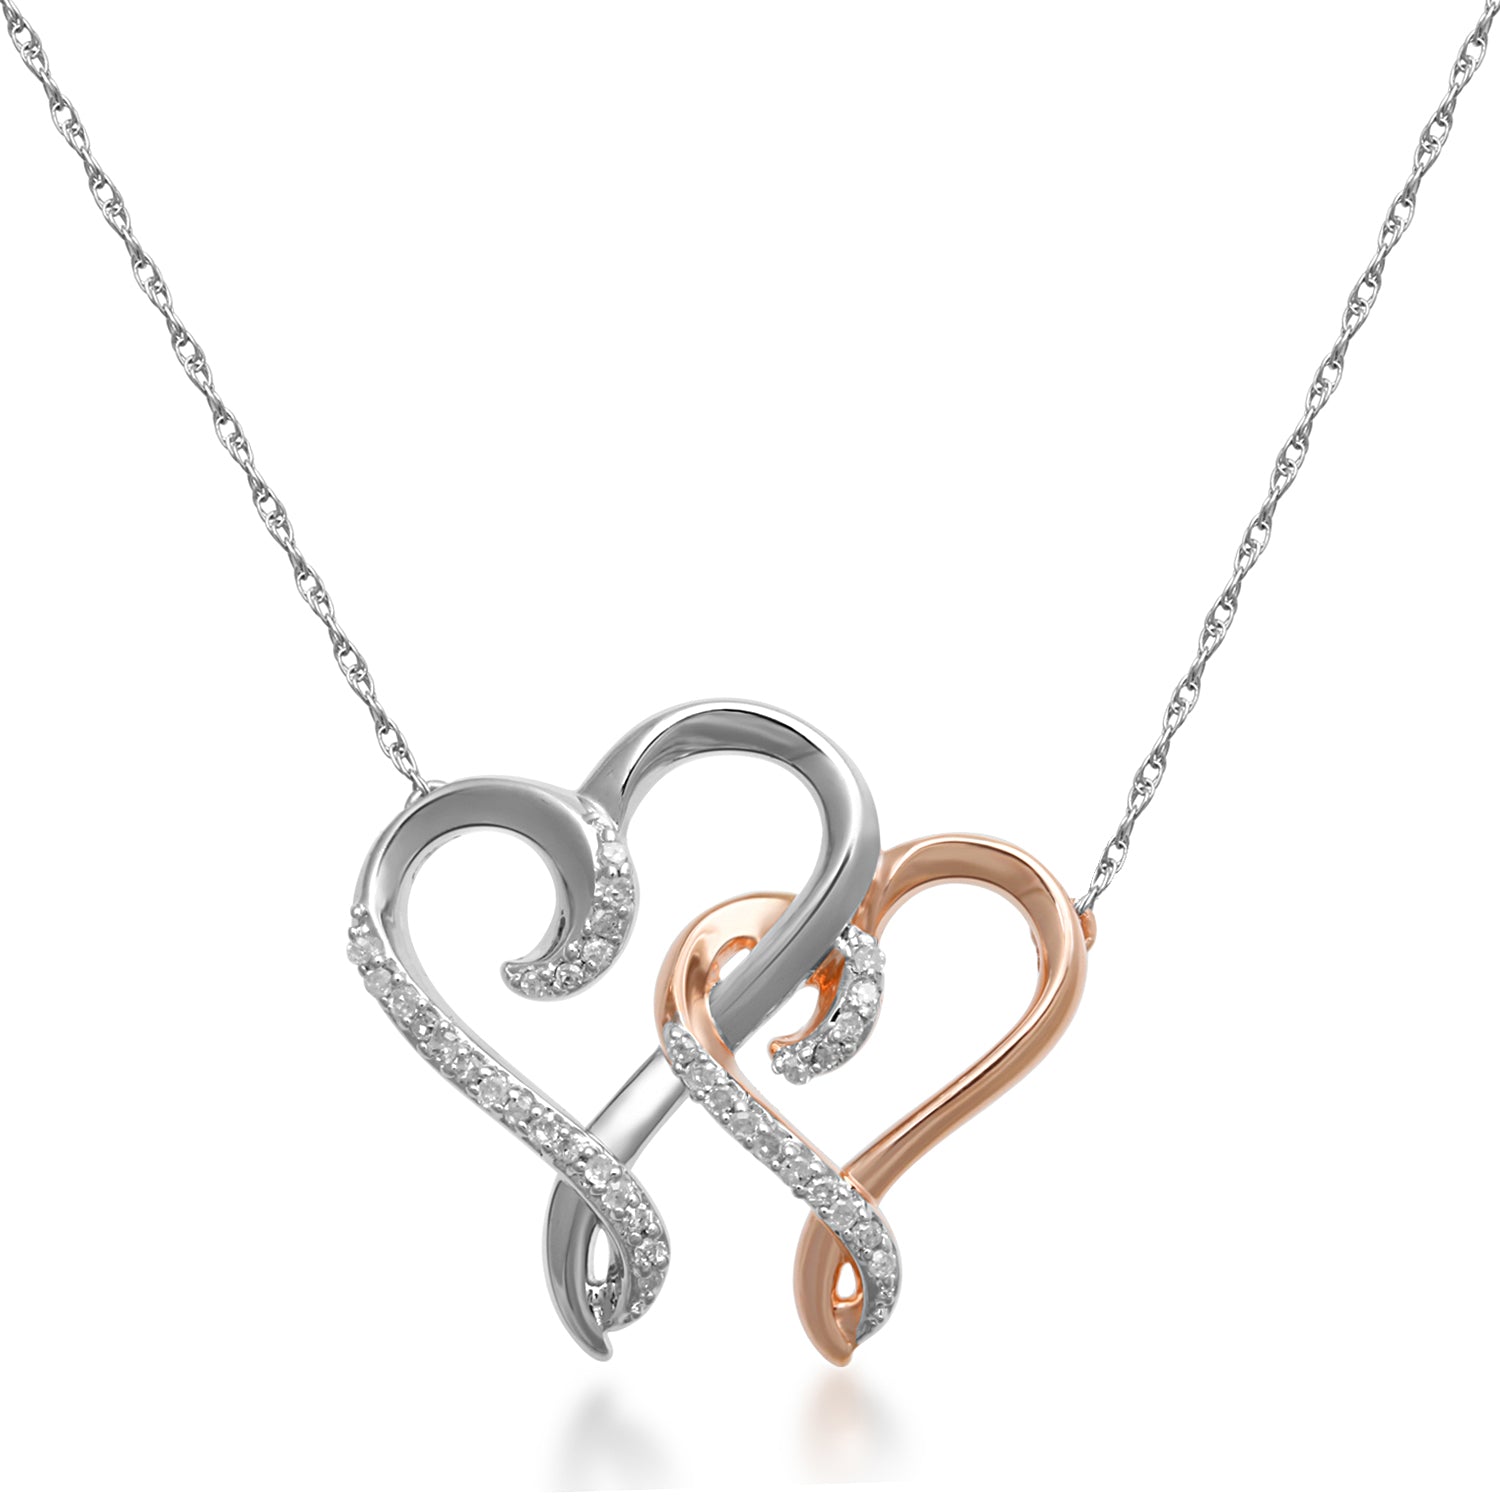 Jewelili Double Heart Necklace Pendant with Natural White Round